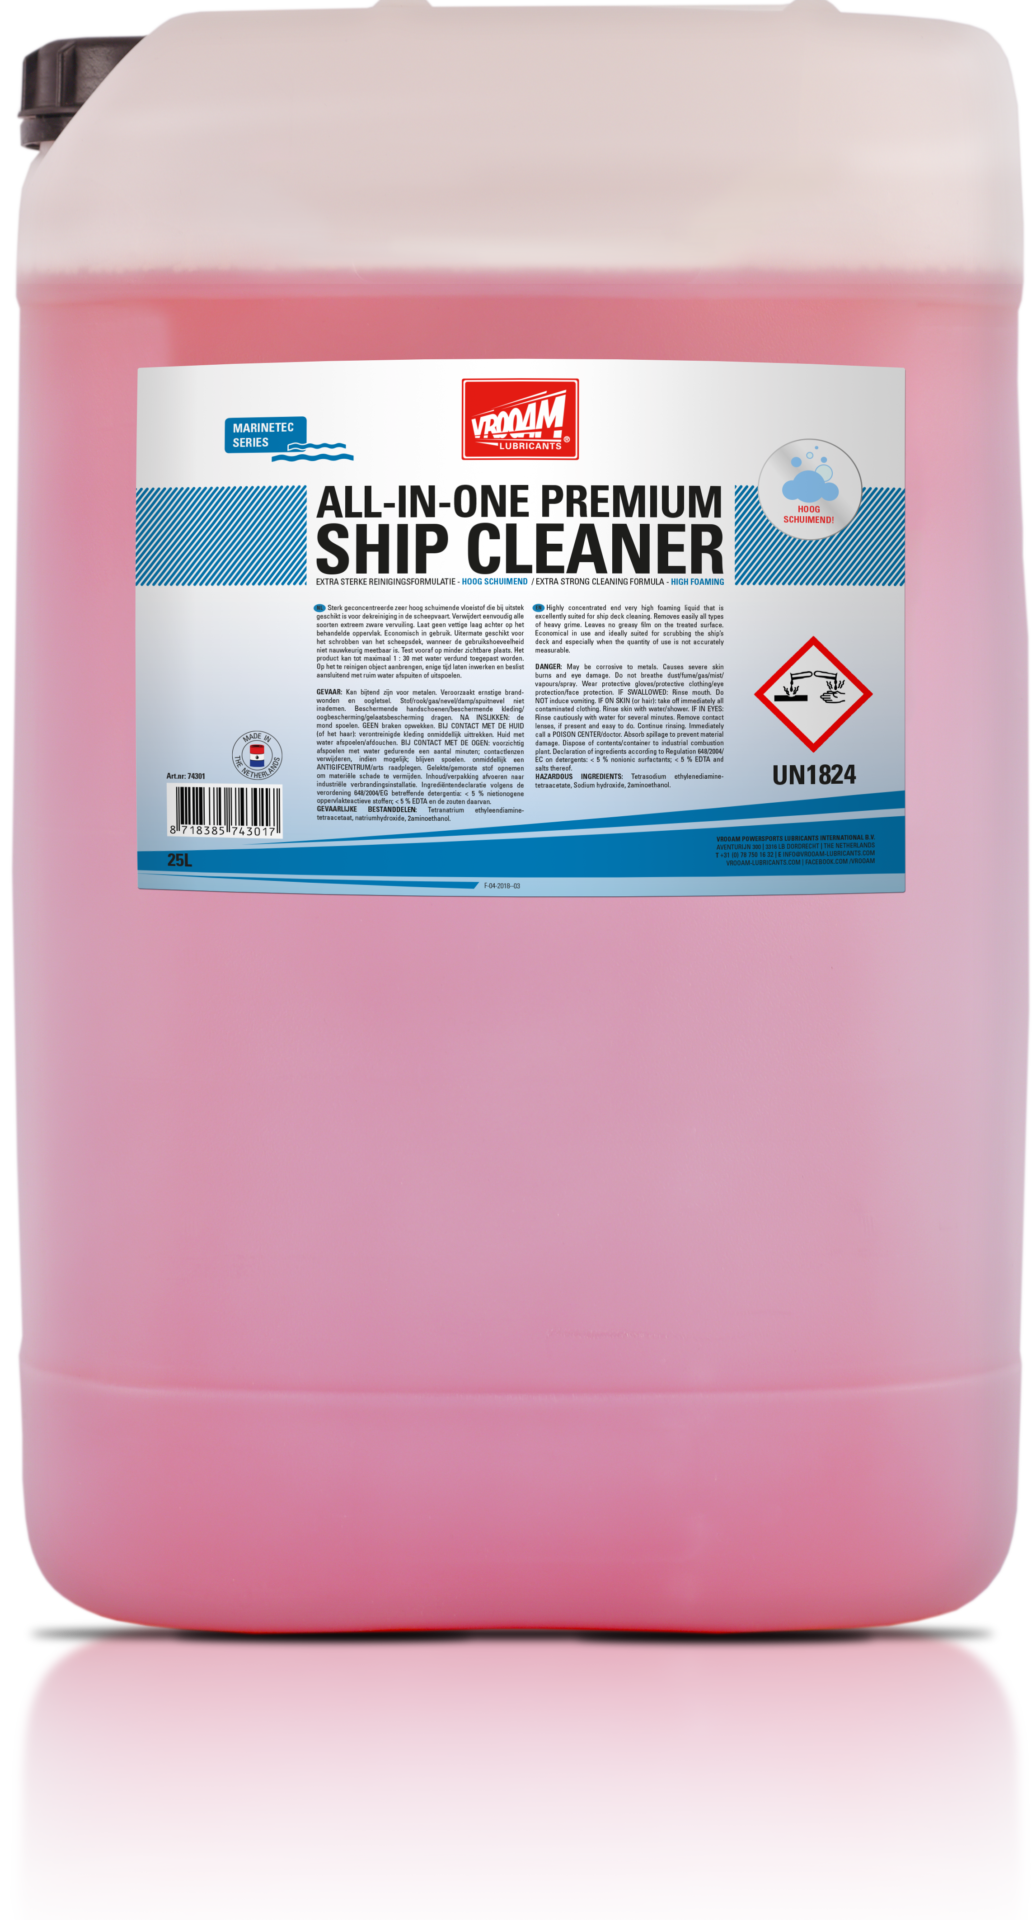 74301_All-In-One-Premium-Ship-Cleaner_Reflect